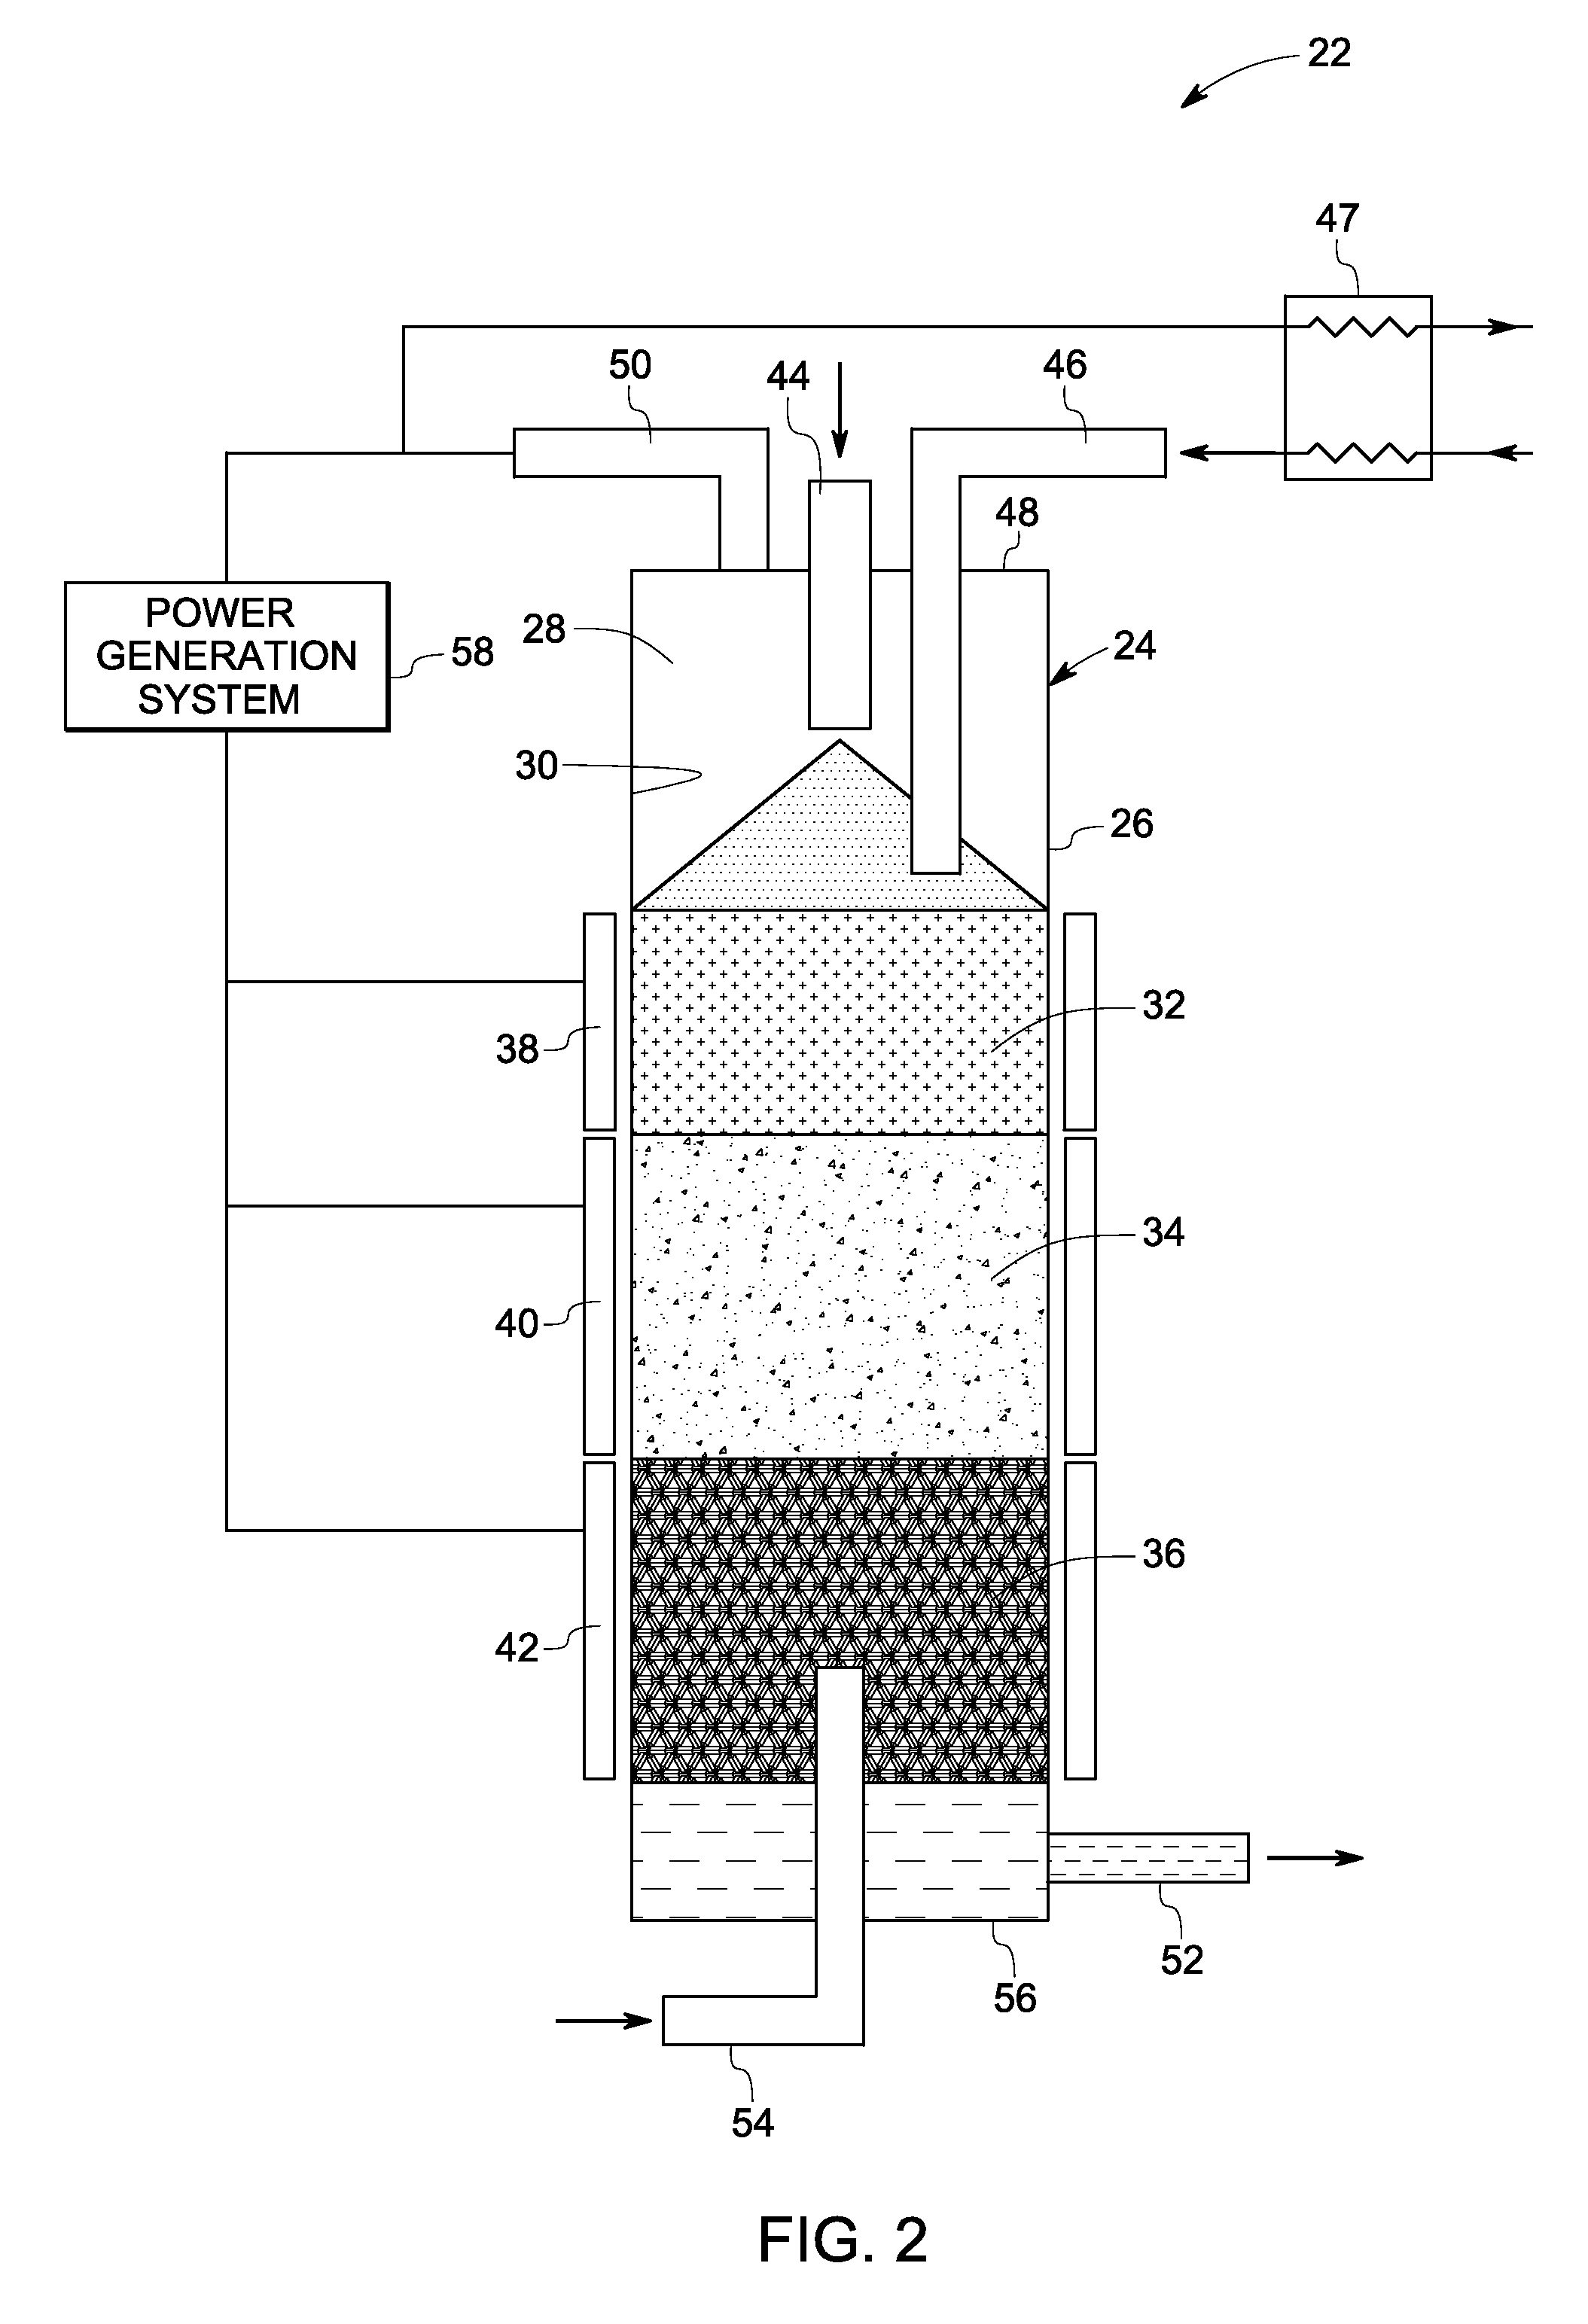 System and method for producing solar grade silicon